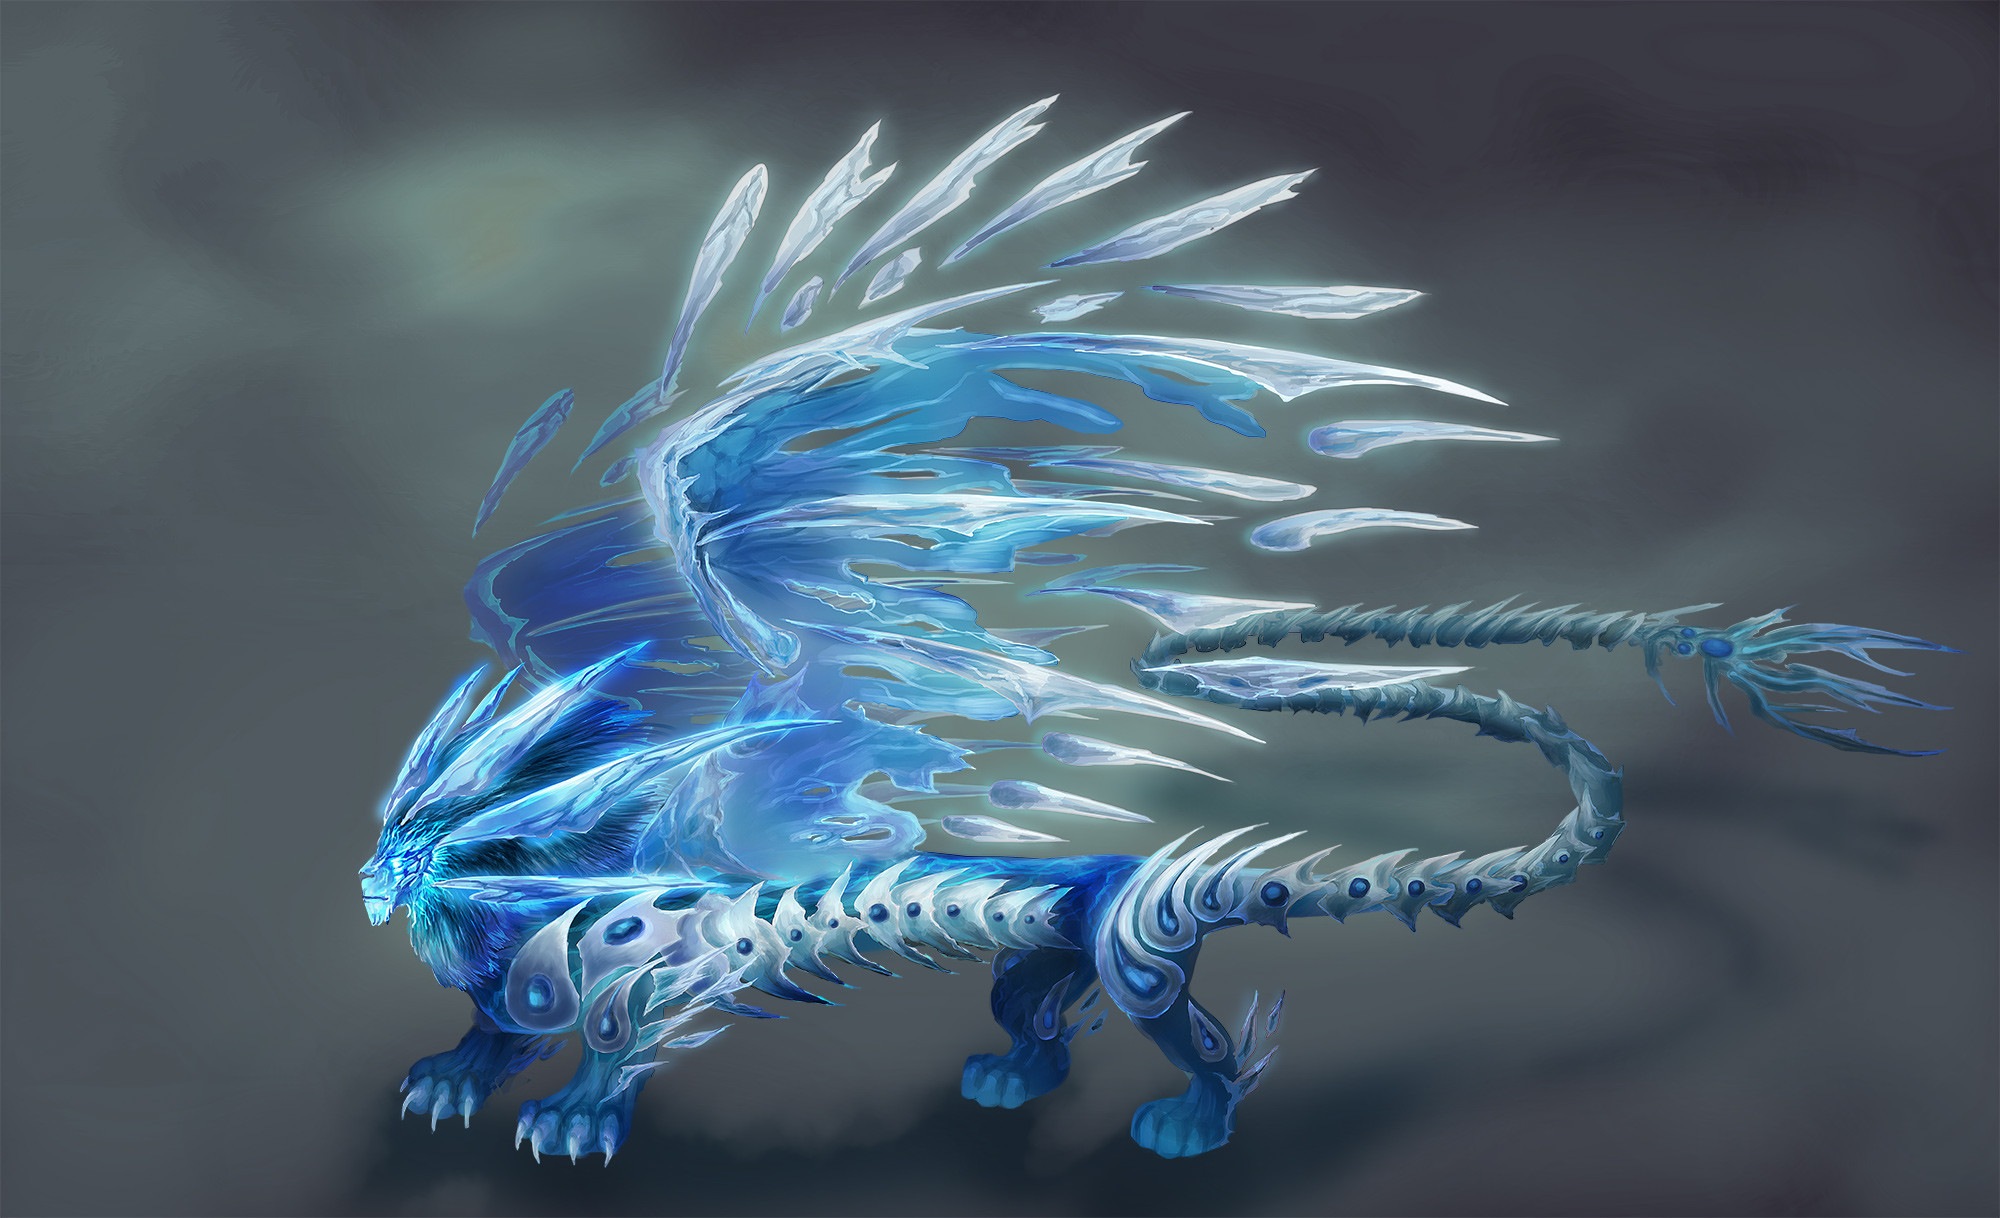 Final concept for the ice lion